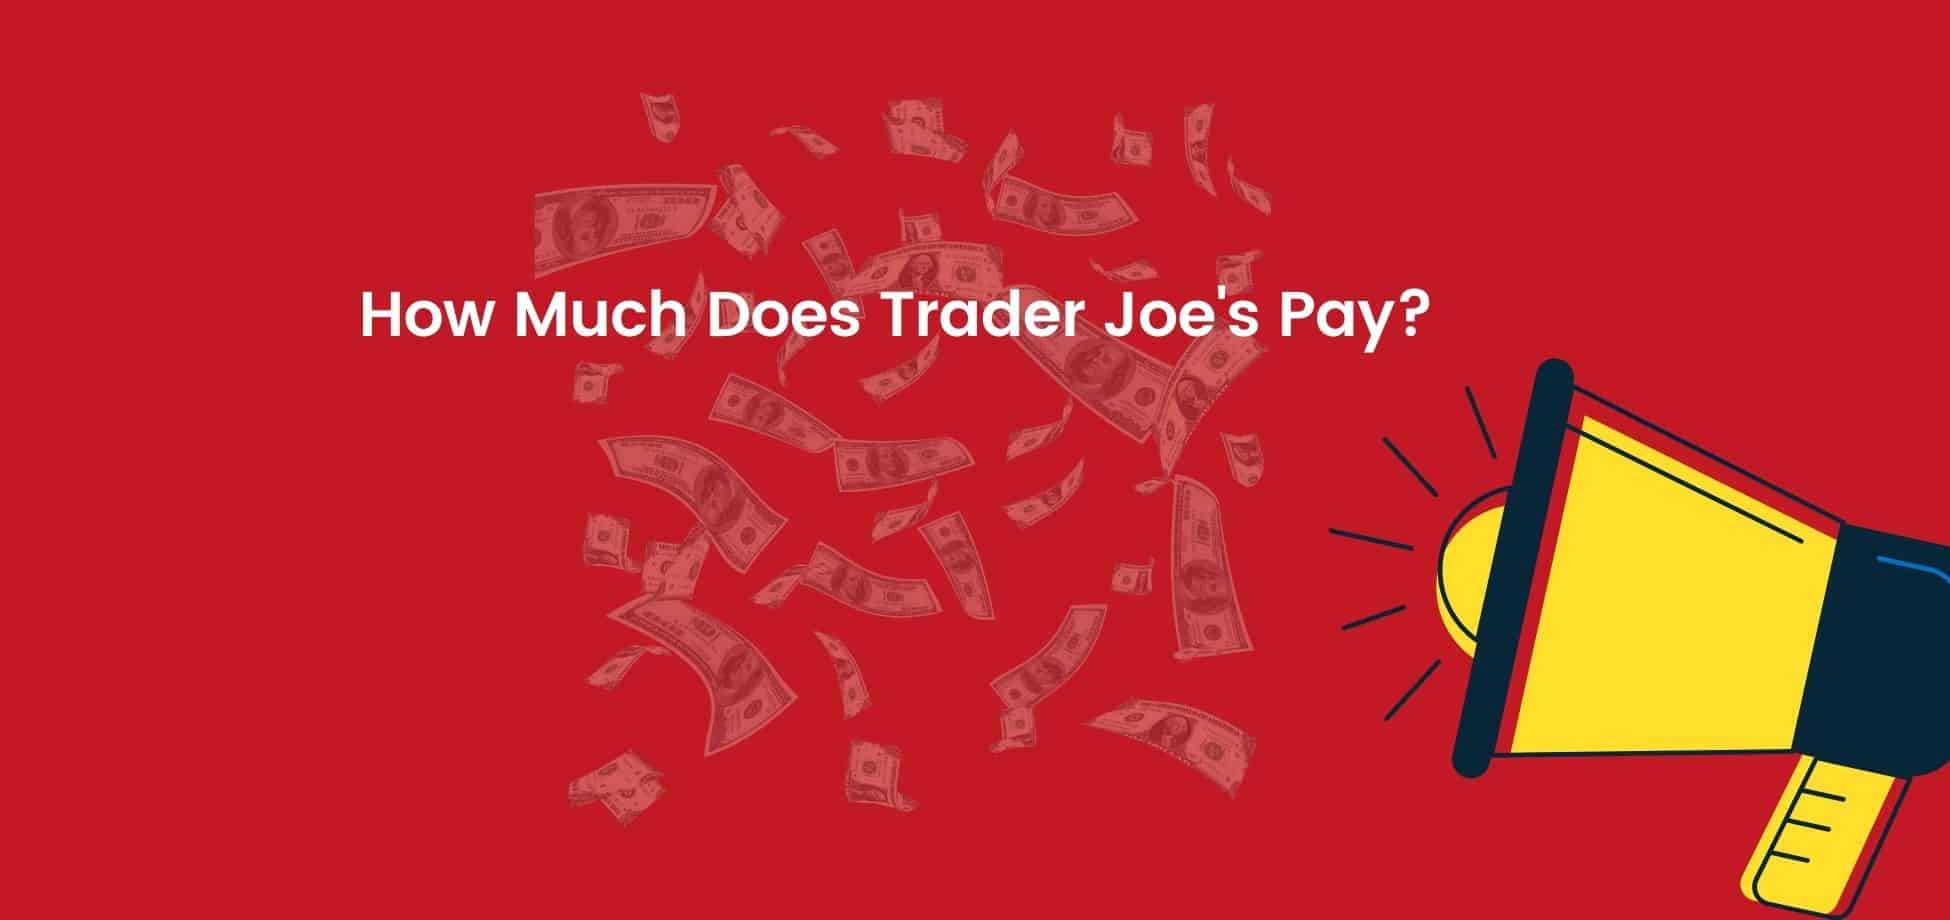 Trader Joe's average salaries for all its workers are well-above average for any type of retail job.